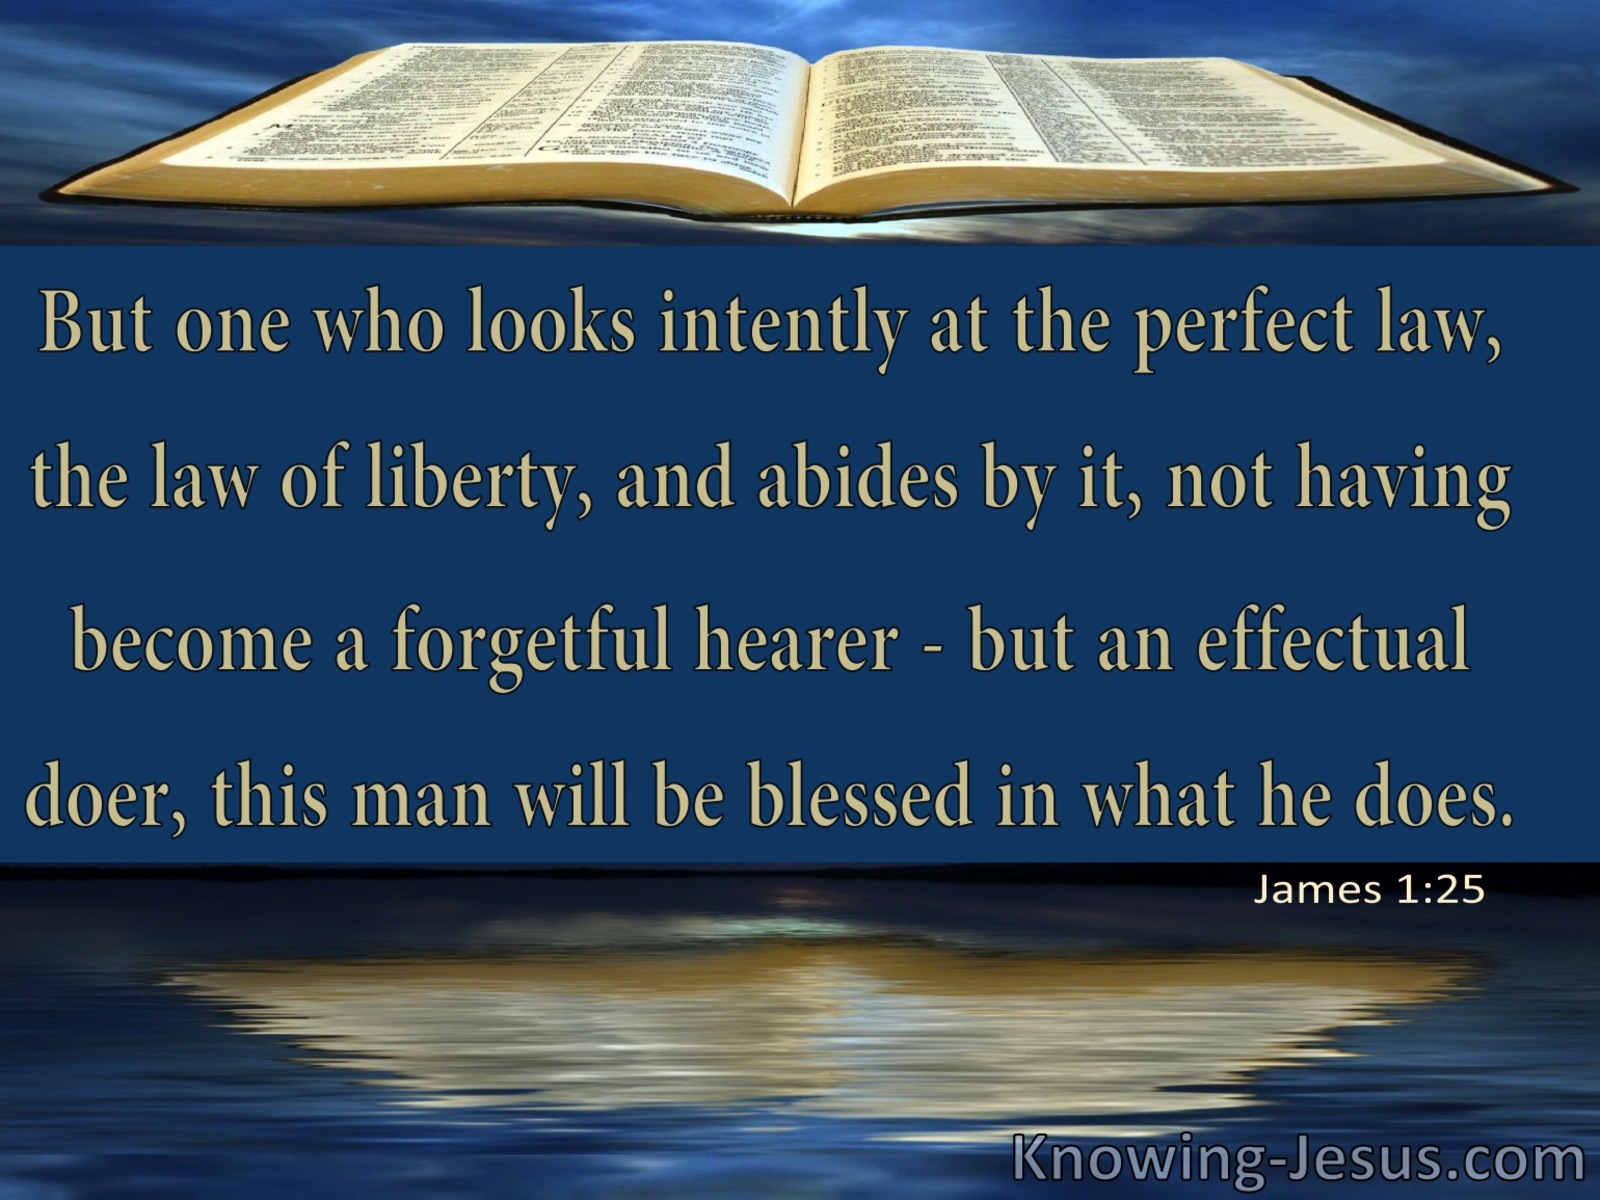 James 1:25 Abide By The Perfect Law Of Liberty (yellow)